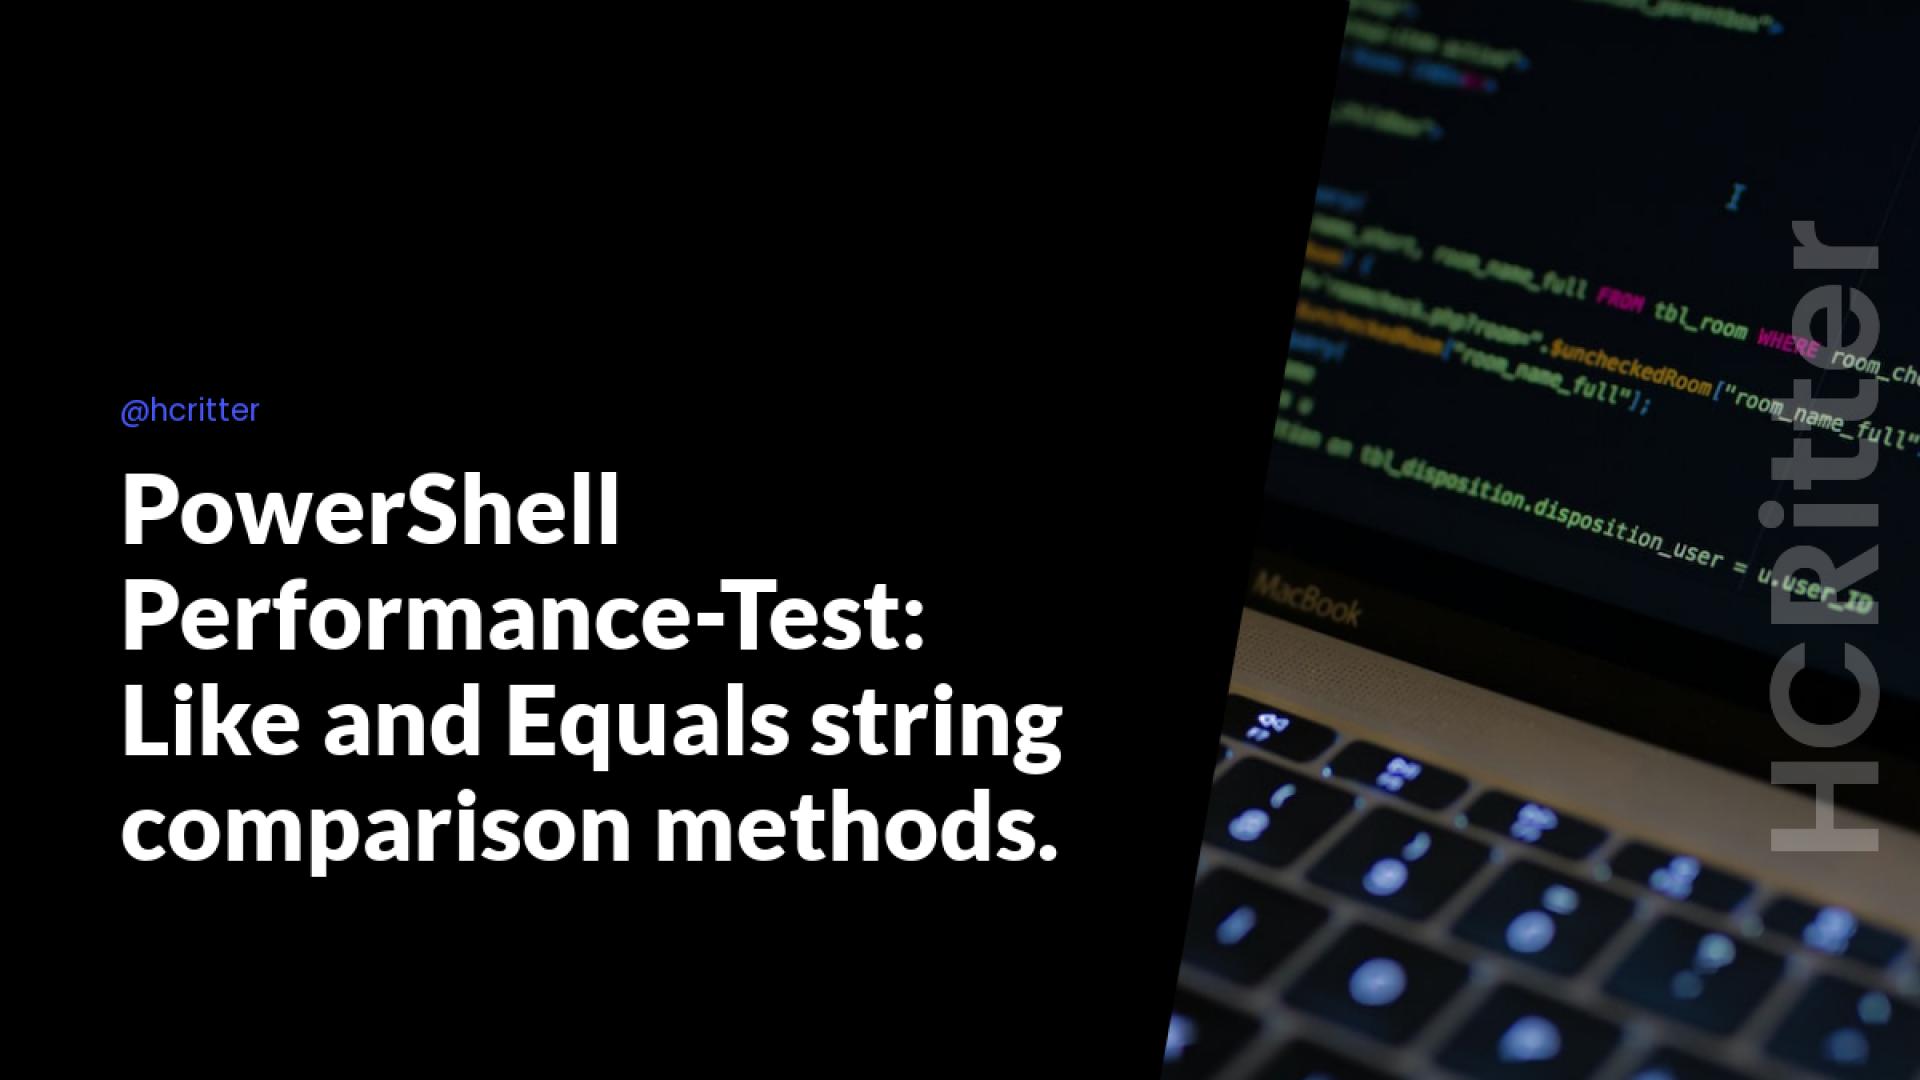 PowerShell Performance-Test: Like and Equals string comparison methods.